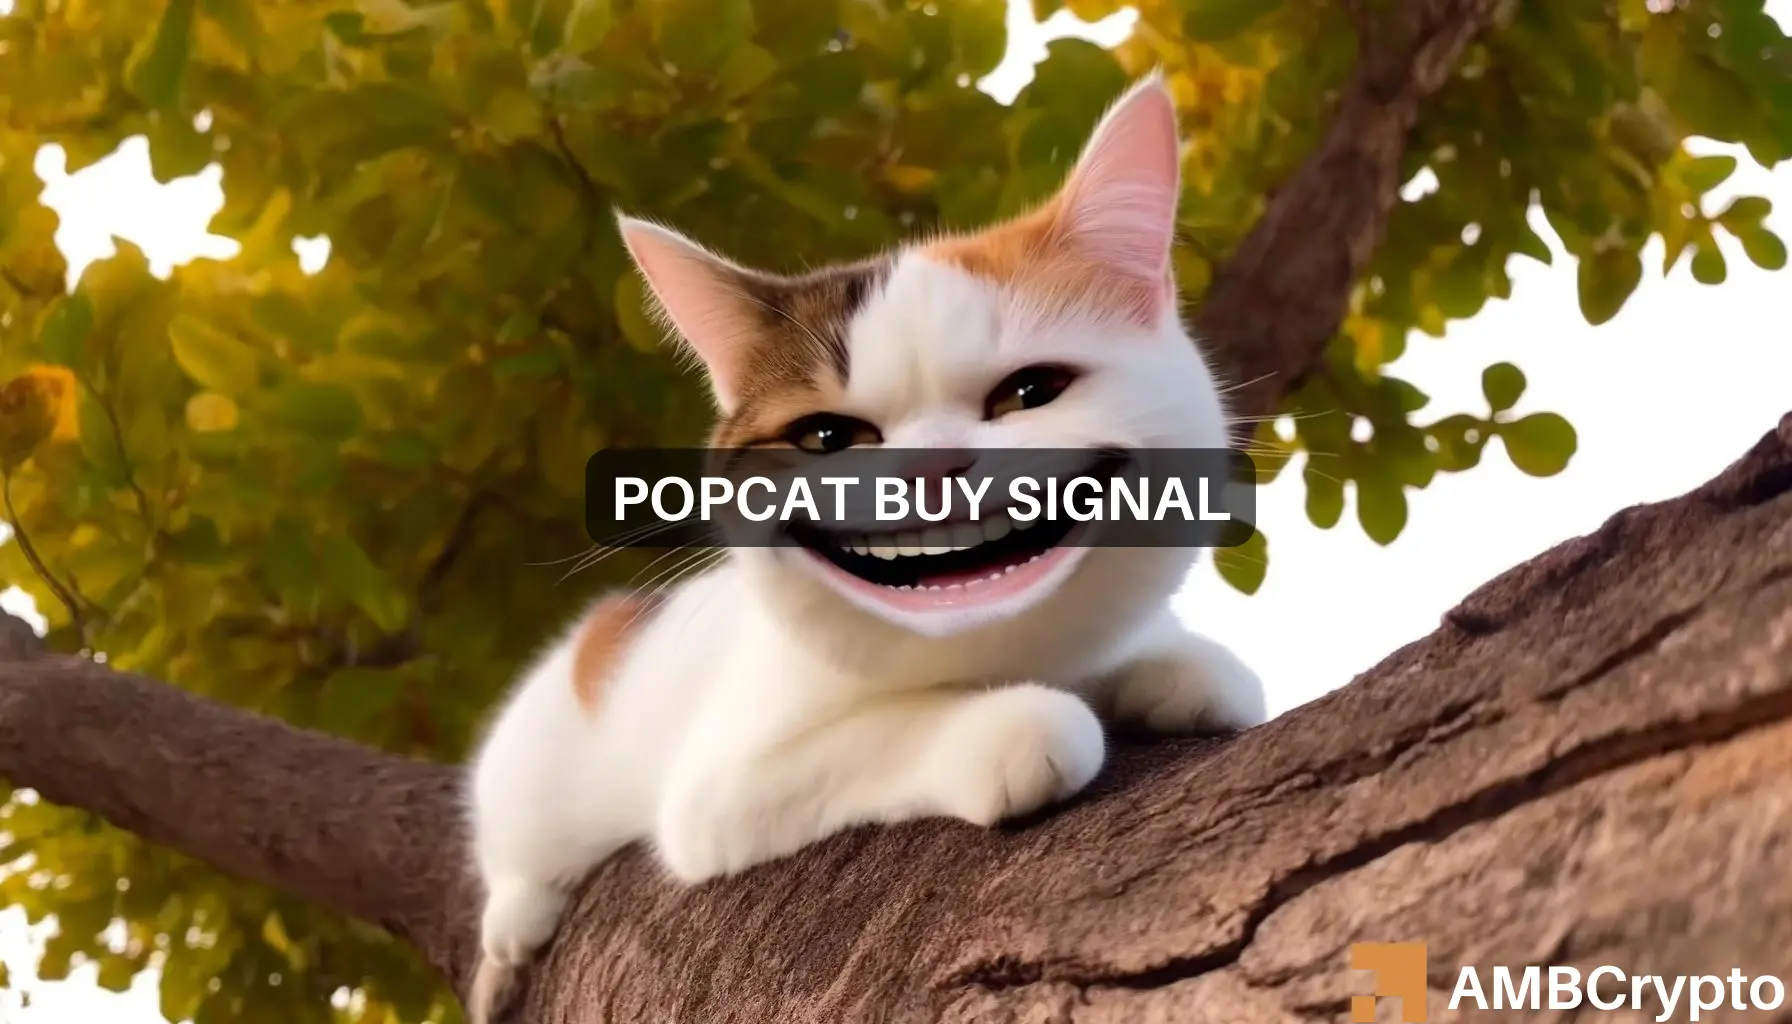 Popcat Nears $1 Resistance: Should Traders Prepare for a Potential Price Pullback?